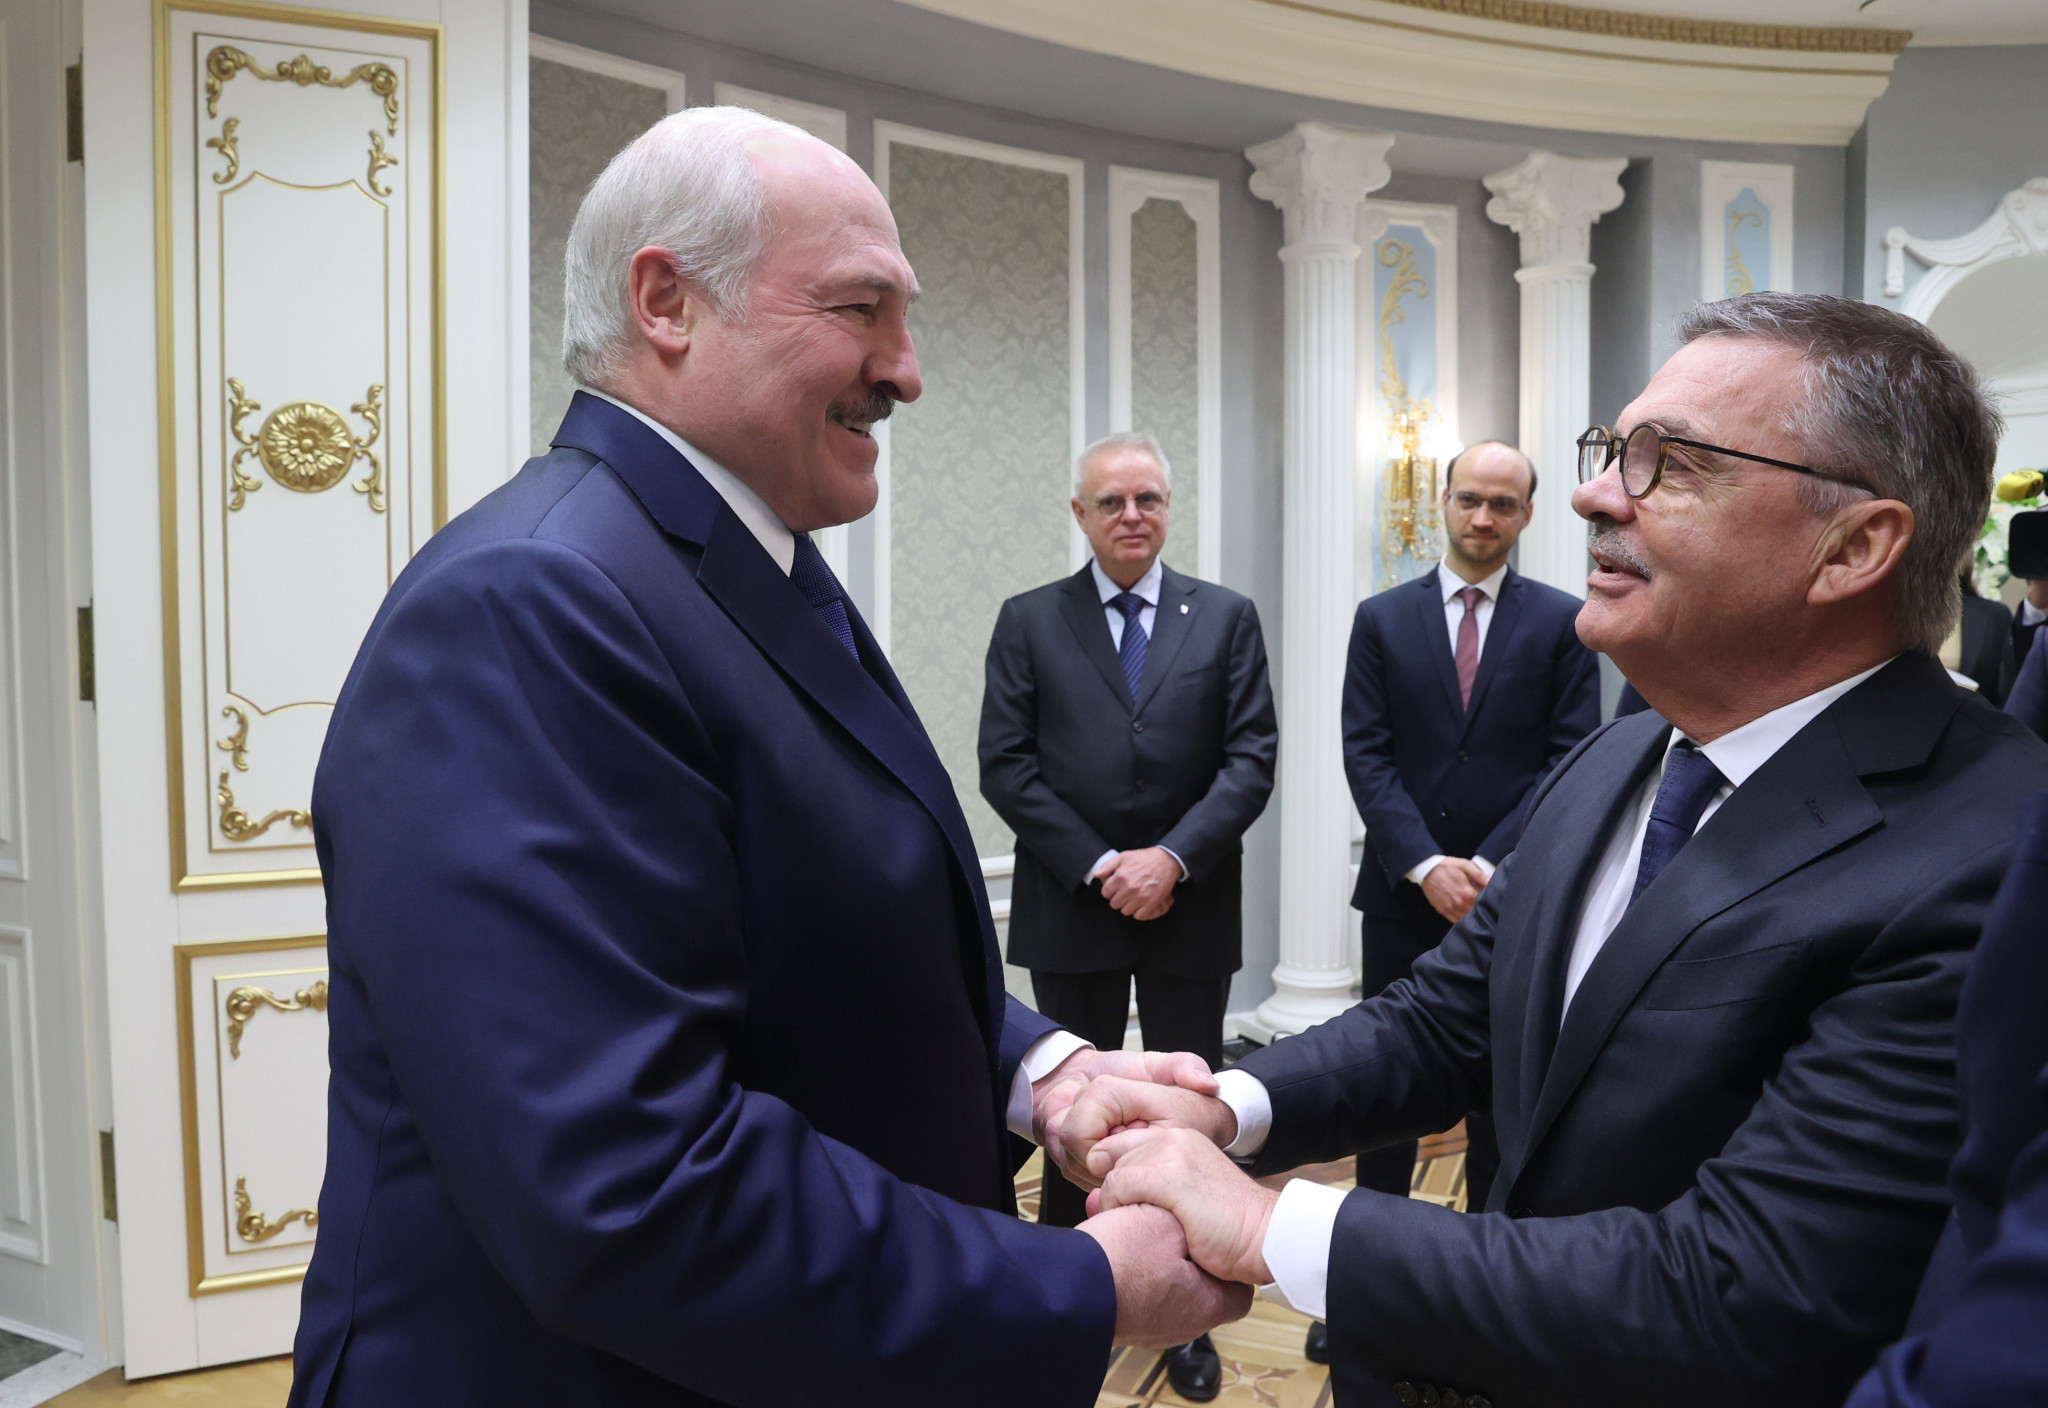 IIHF President René Fasel greeted Belarusian President Alexander Lukashenko warmly at the start of their meeting ©Getty Images